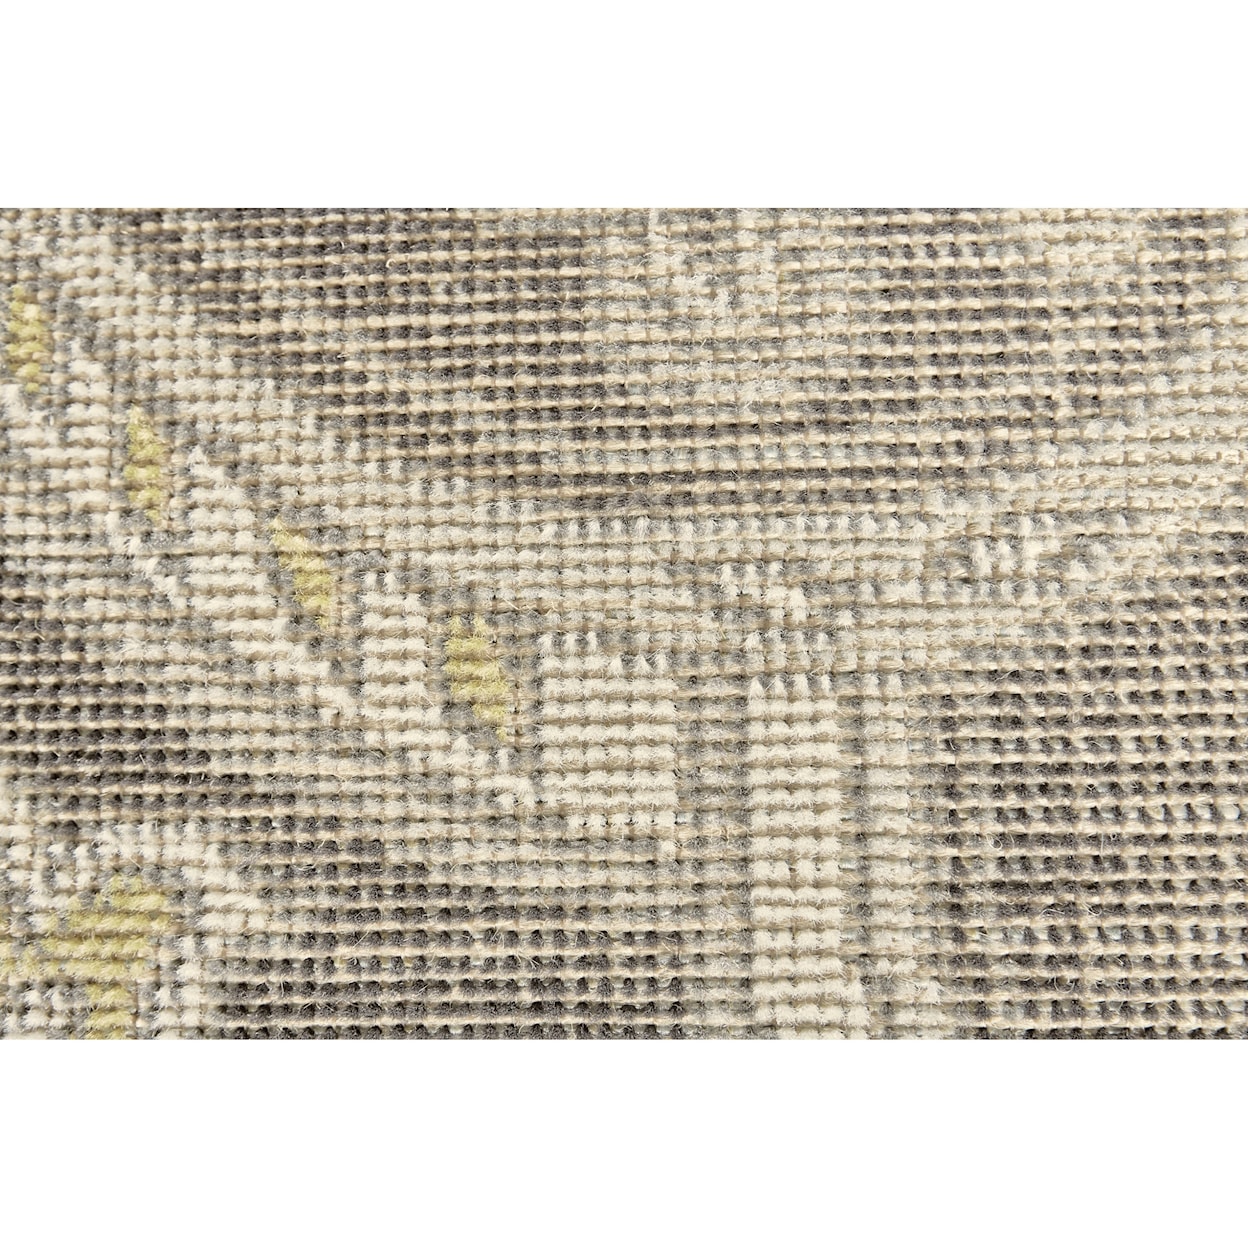 Feizy Rugs Thatcher Ore 5' x 8' Area Rug